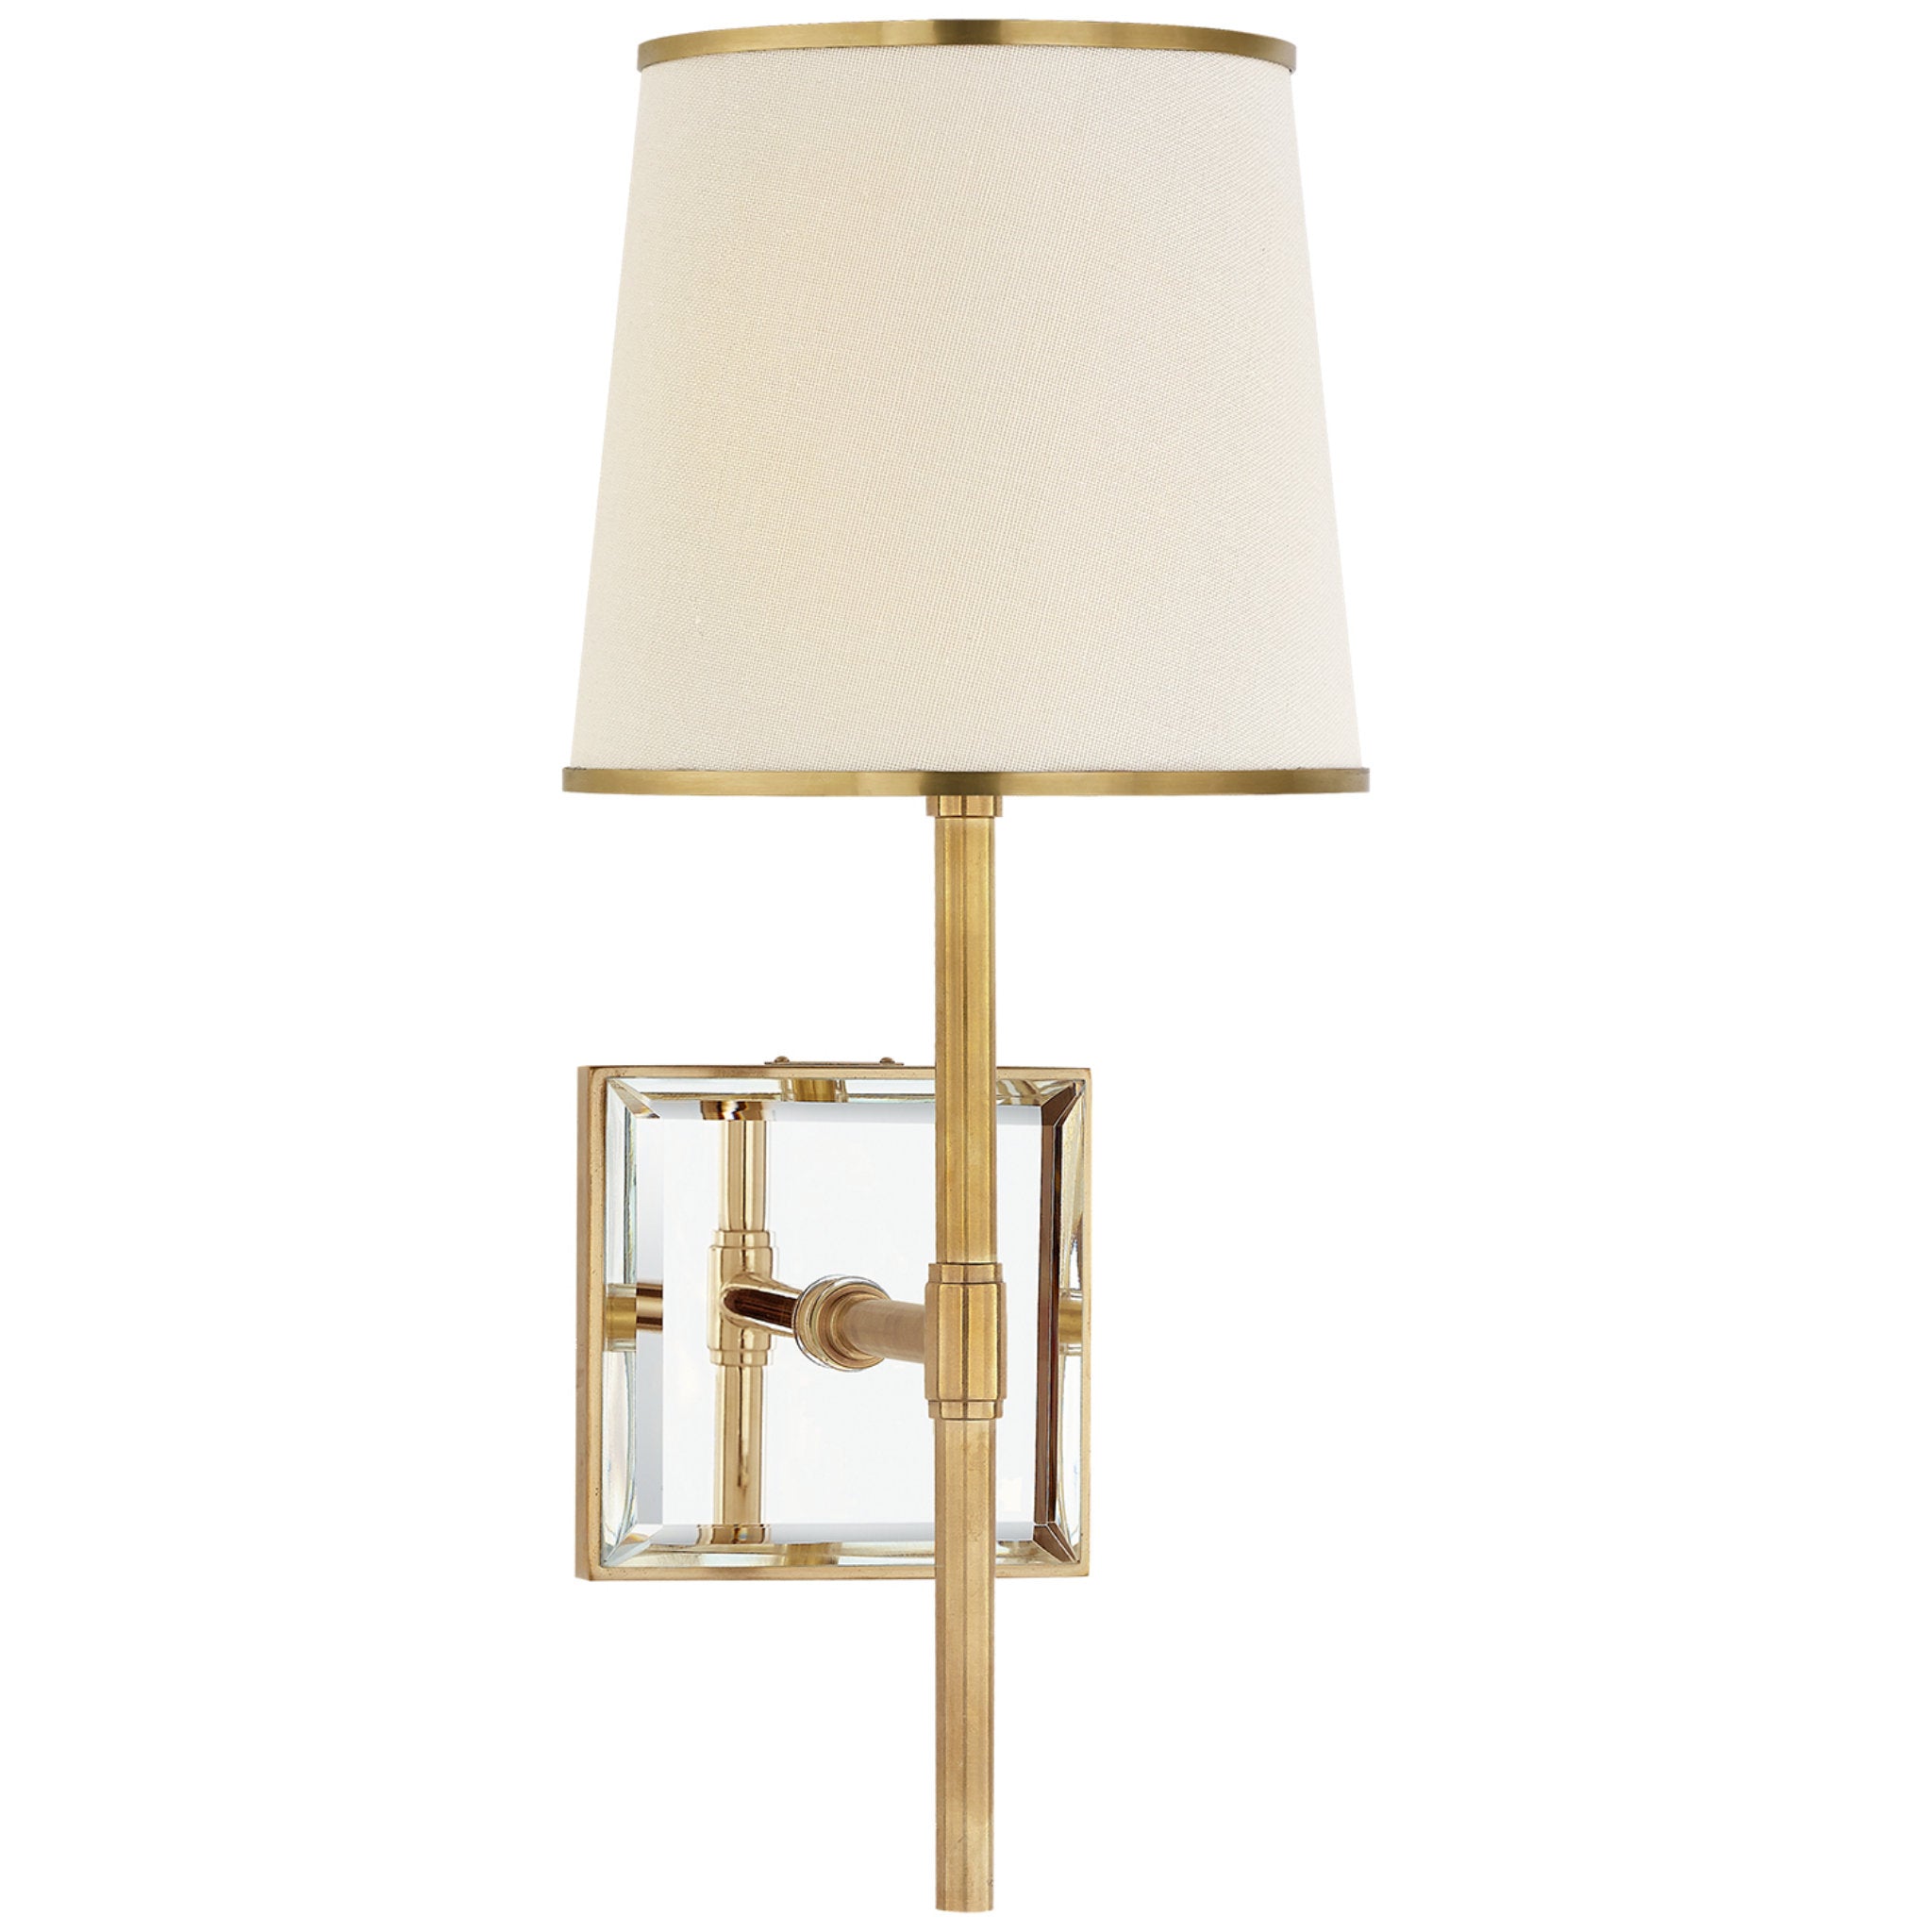 kate spade new york Bradford Medium Sconce in Soft Brass and Mirror with Cream Linen Shade with Soft Brass Trim